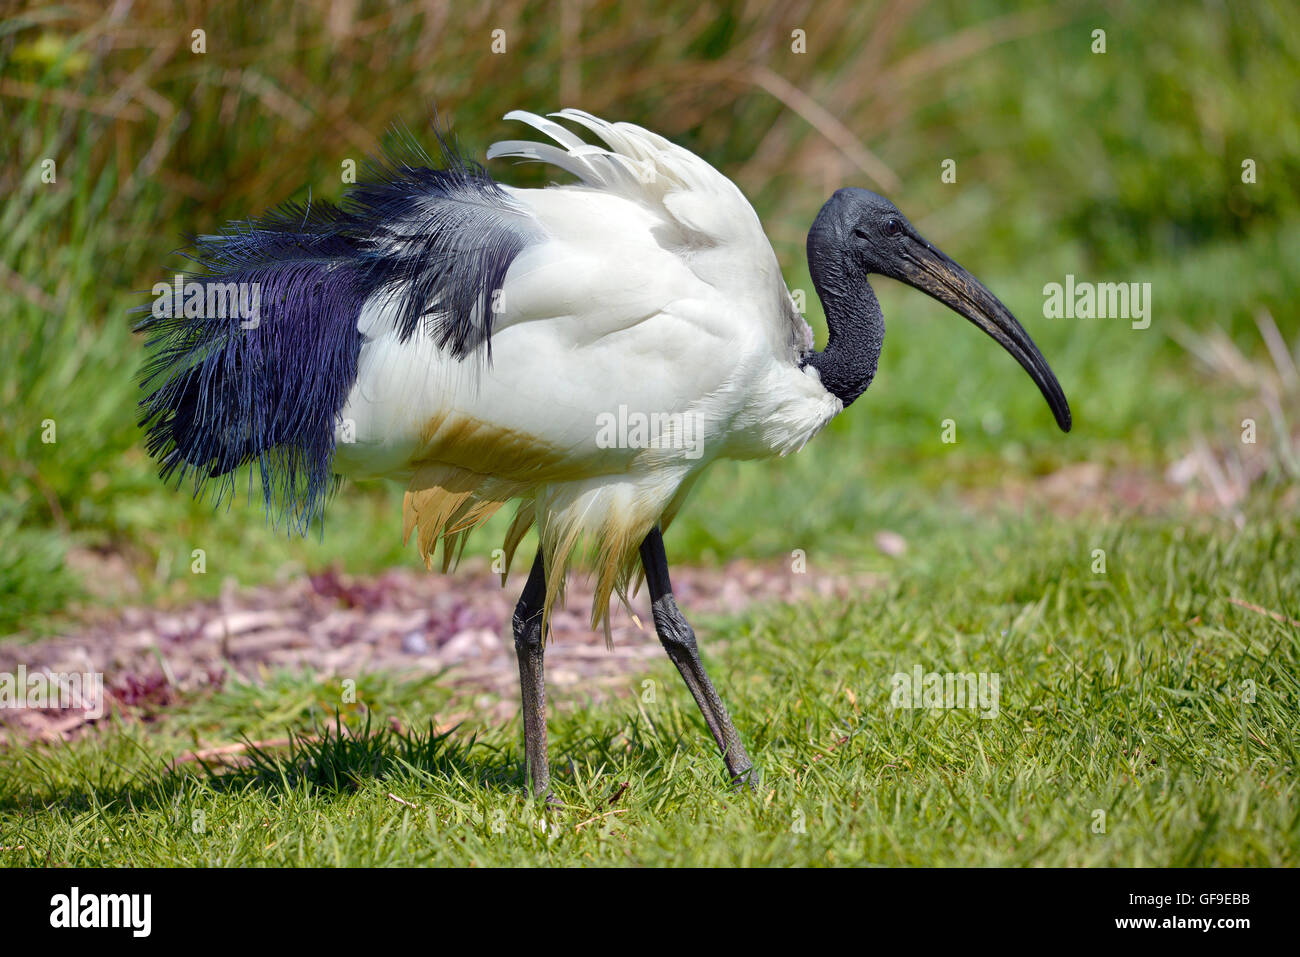 African sacred ibis Threskiornis aethiopicus view of profile, walking on grass Stock Photo